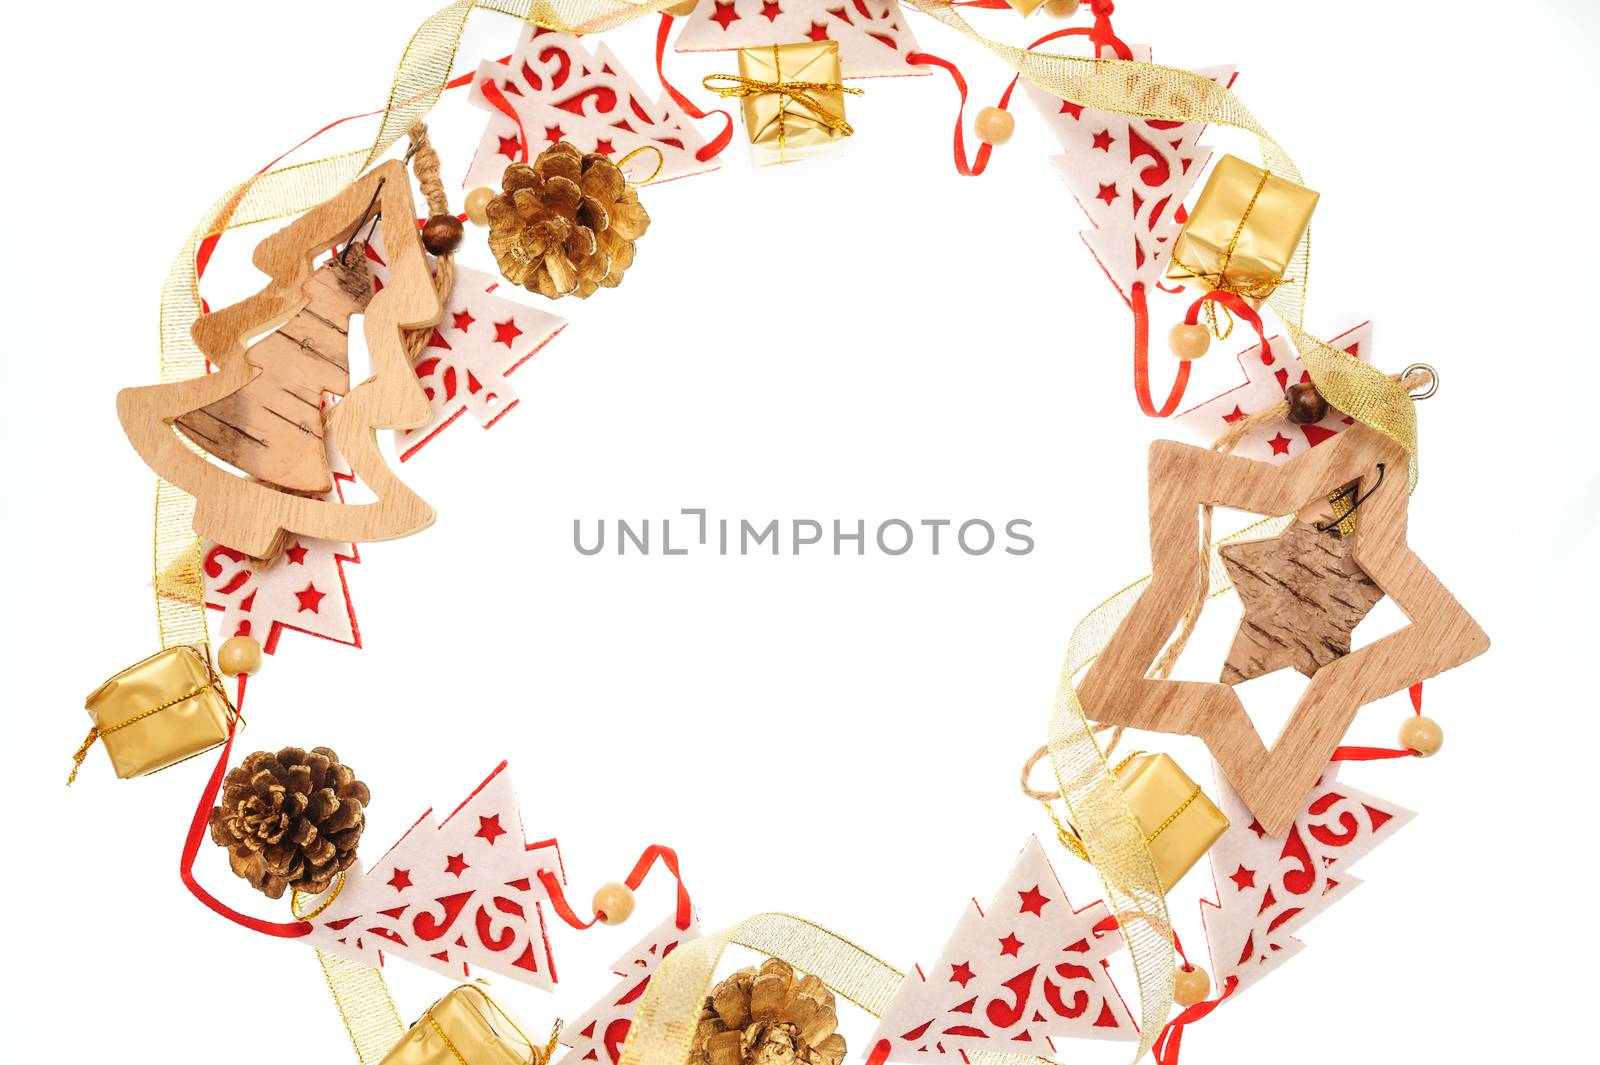 frame made of wooden Christmas toys on a white background and text.